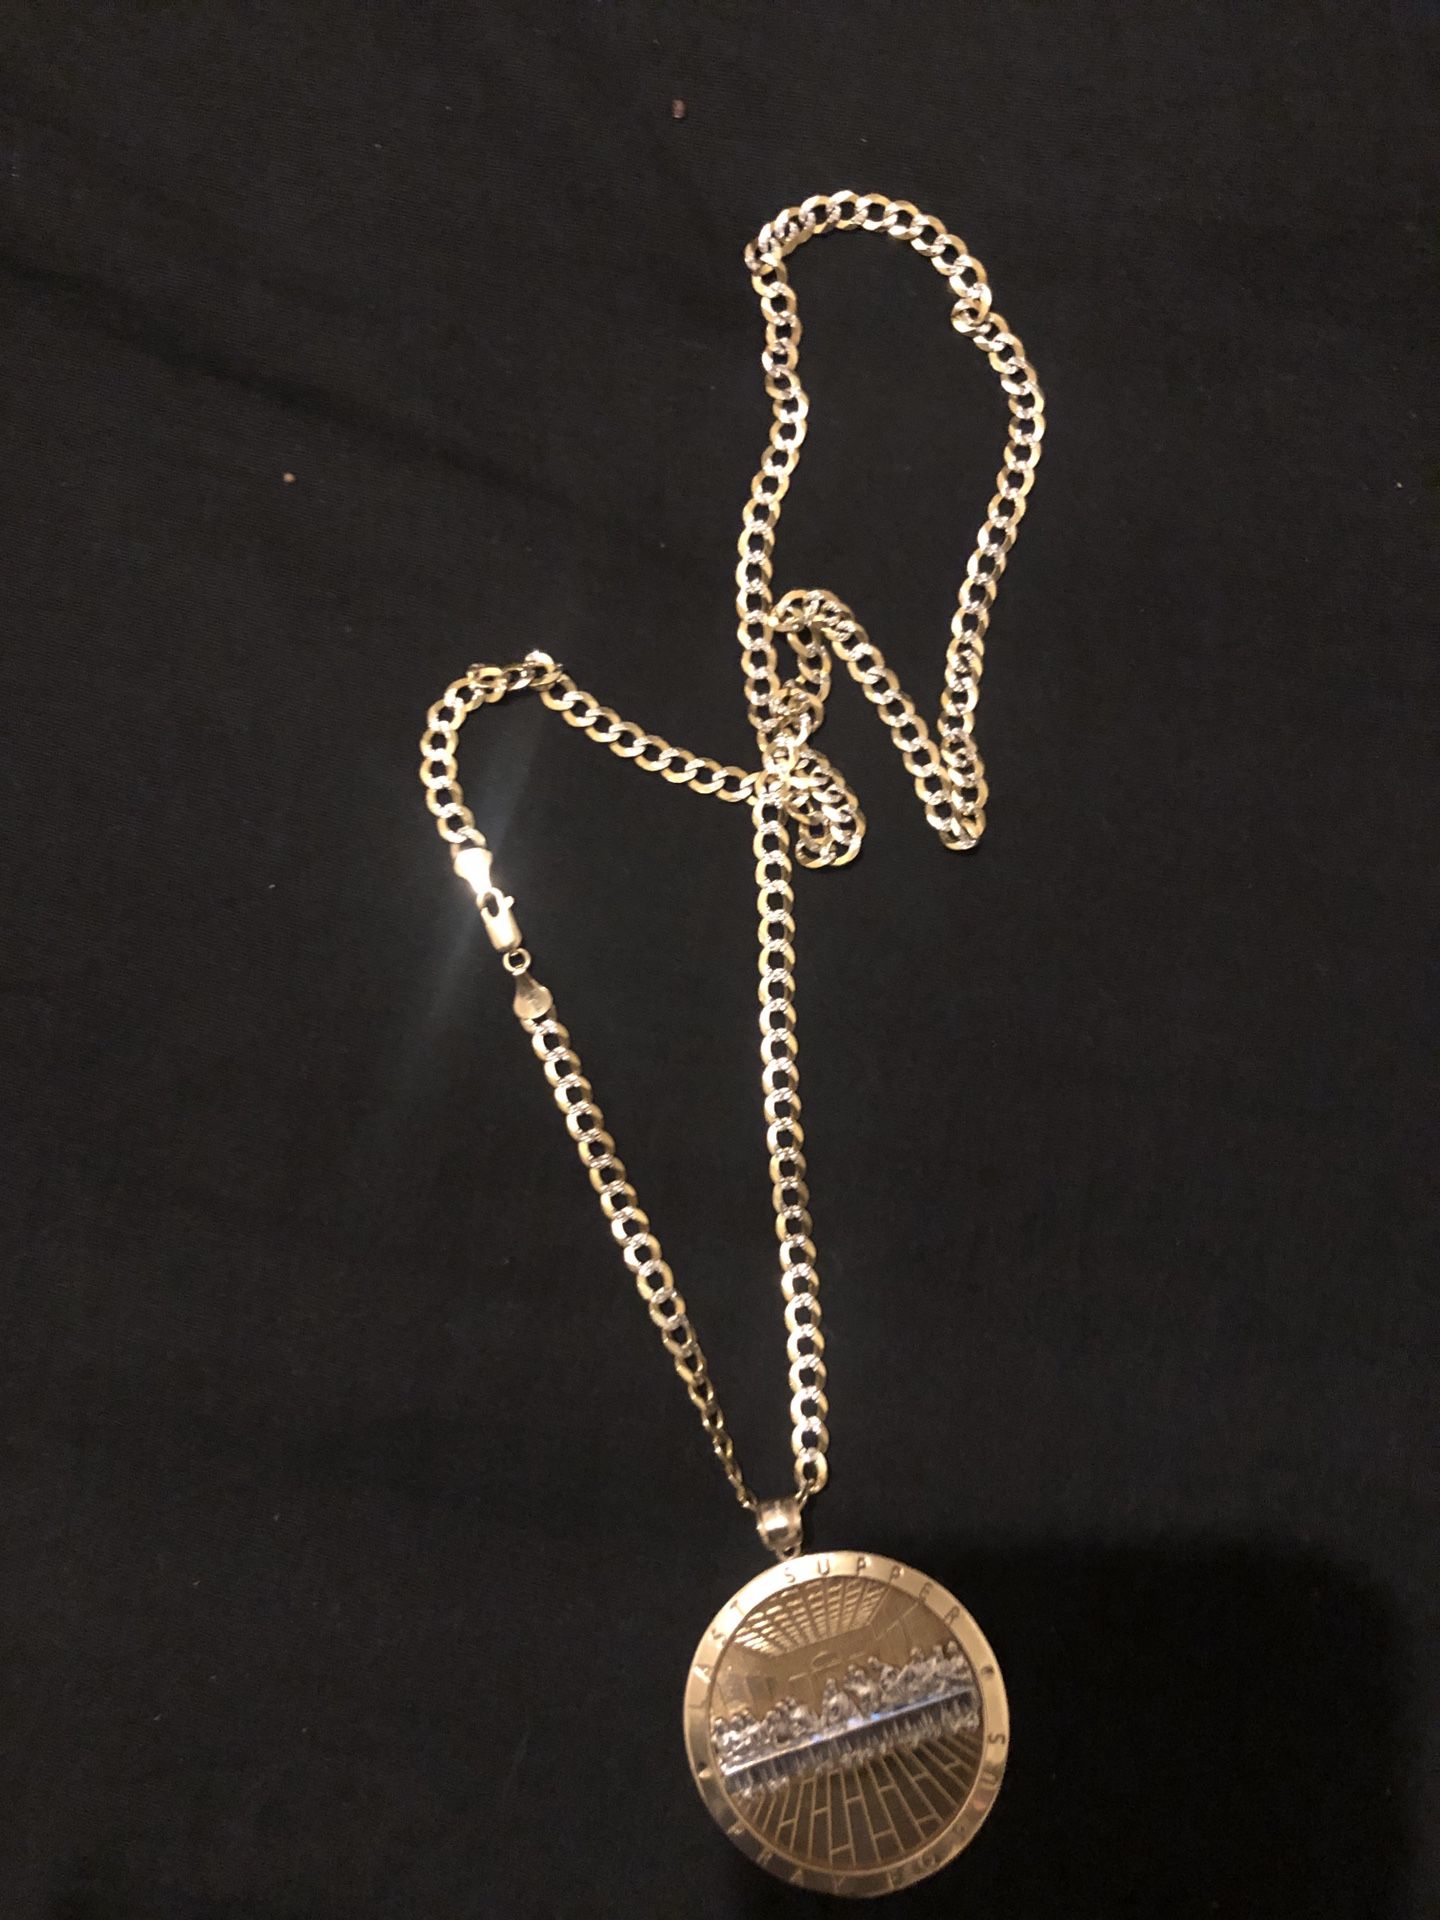 10k gold chain and charm 800 firm meet up or pick up only